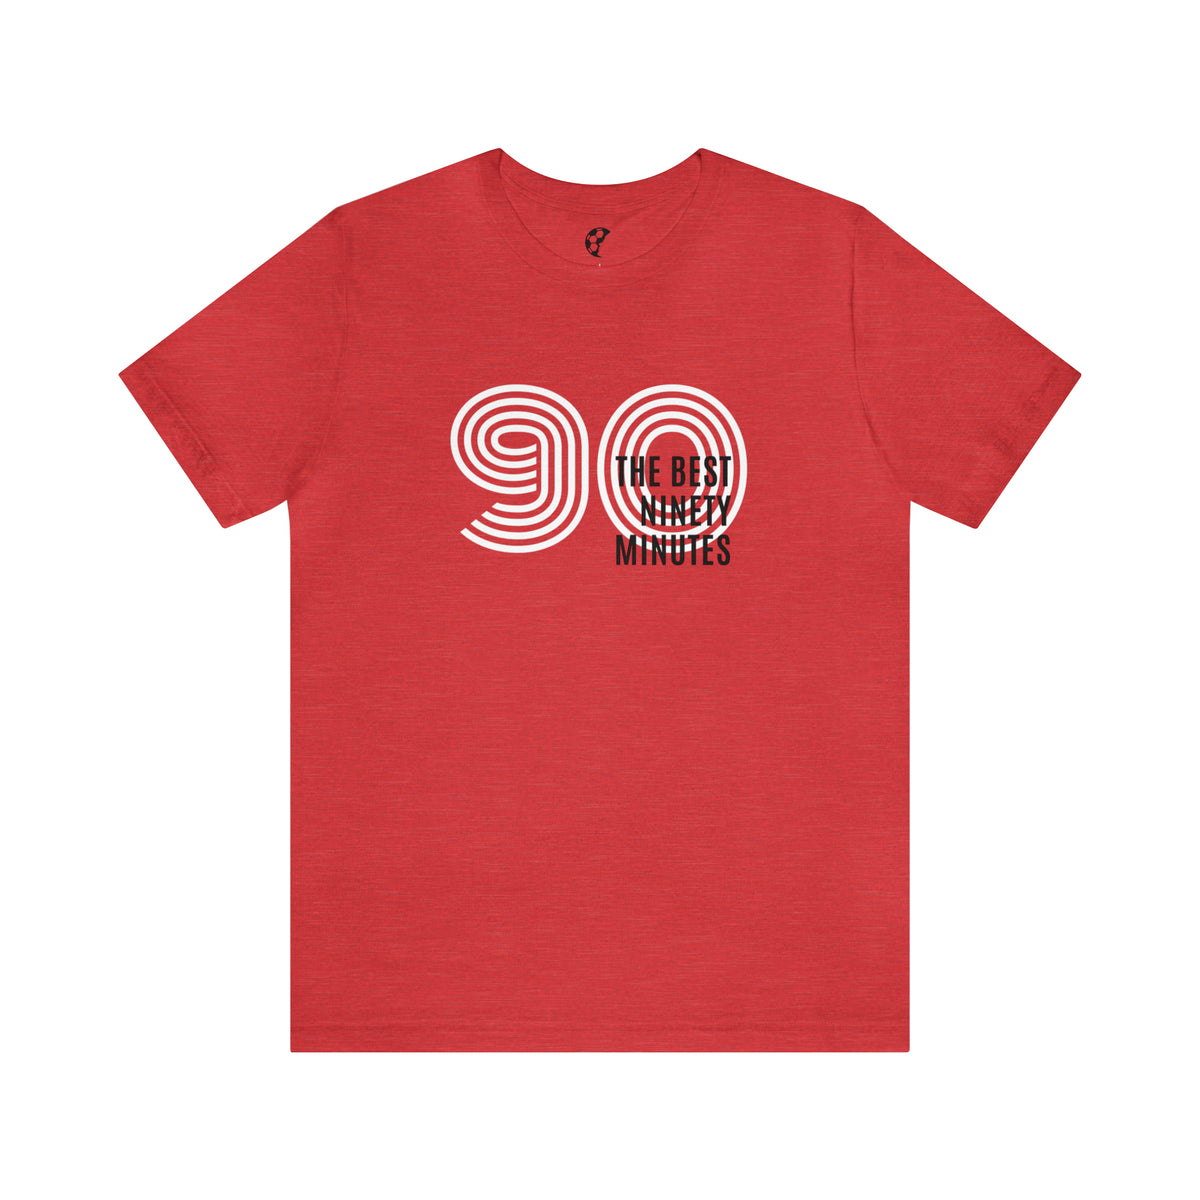 The Best 90 Minutes Adult T-Shirt